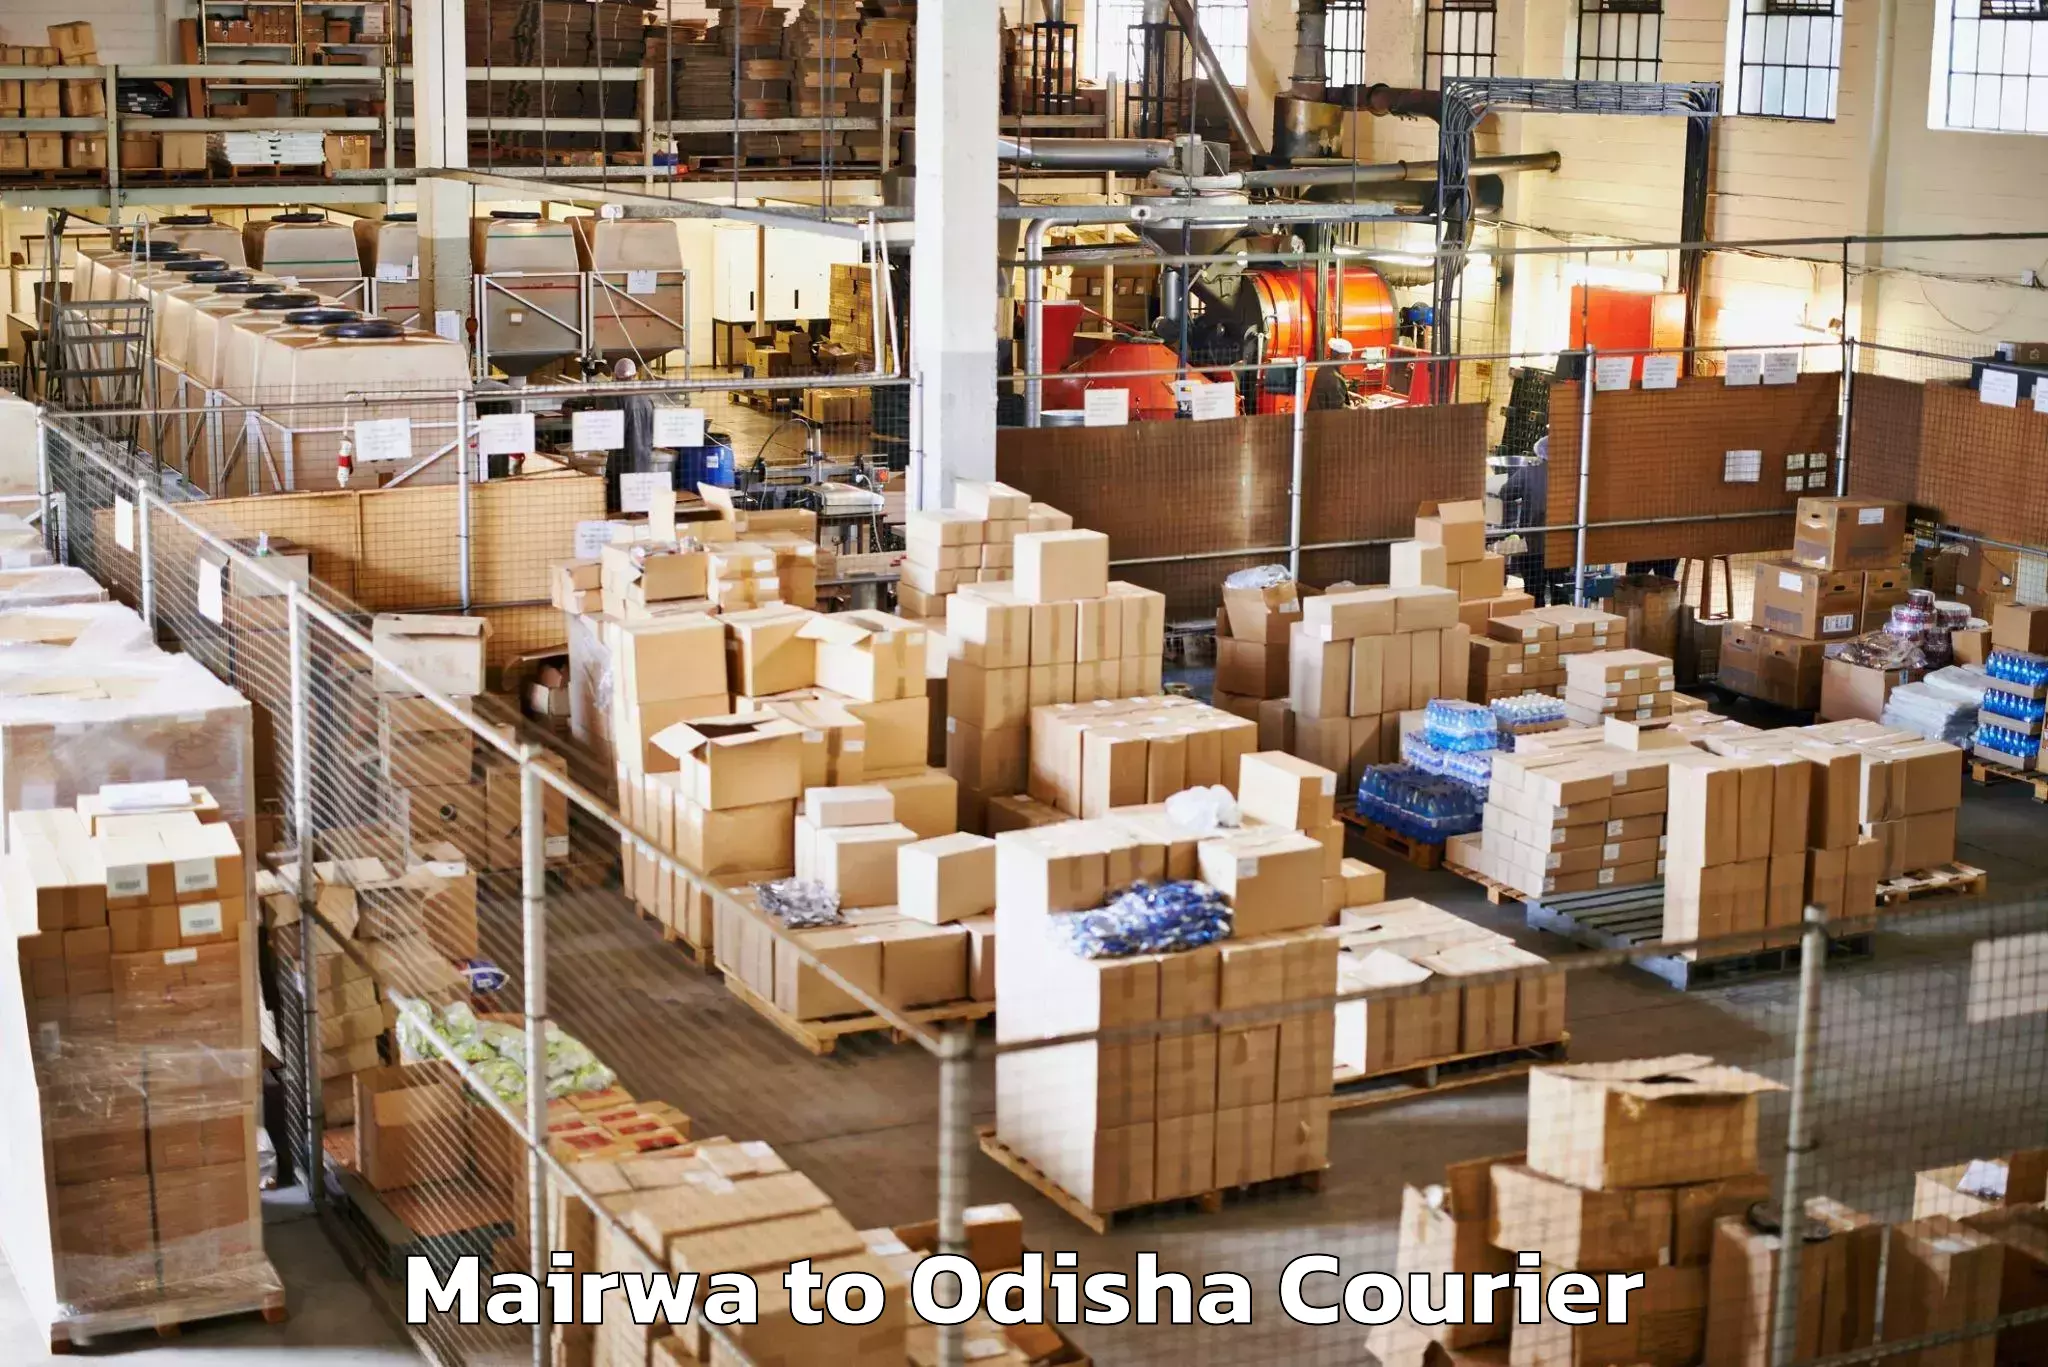 Instant baggage transport quote Mairwa to Kalinga Institute of Industrial Technology Bhubaneswar